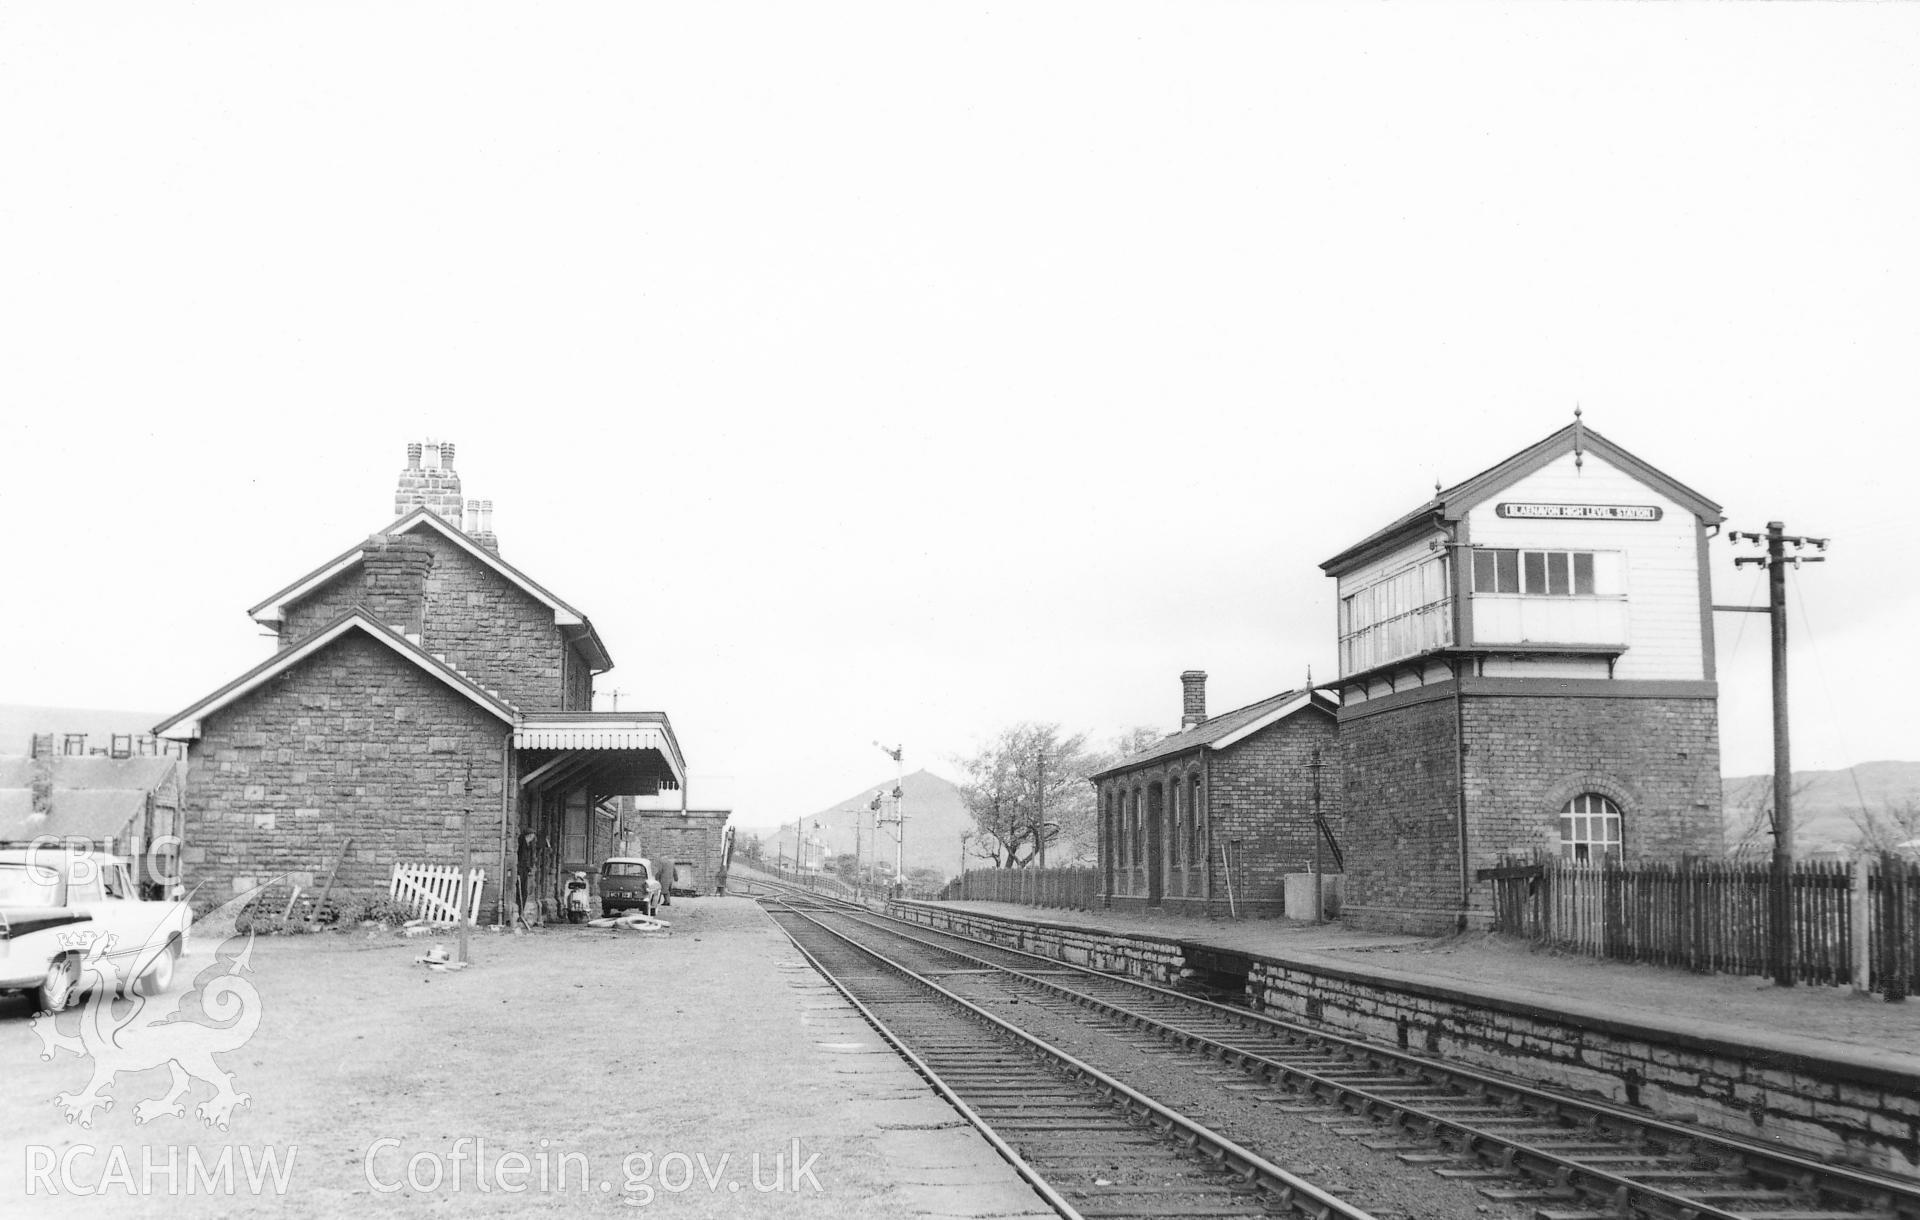 Black and white postcard showing view of Blaenavon Railway Station (higher level). From Rokeby Album VII part 1 of 2 no.11b. Photograph taken in 1961.